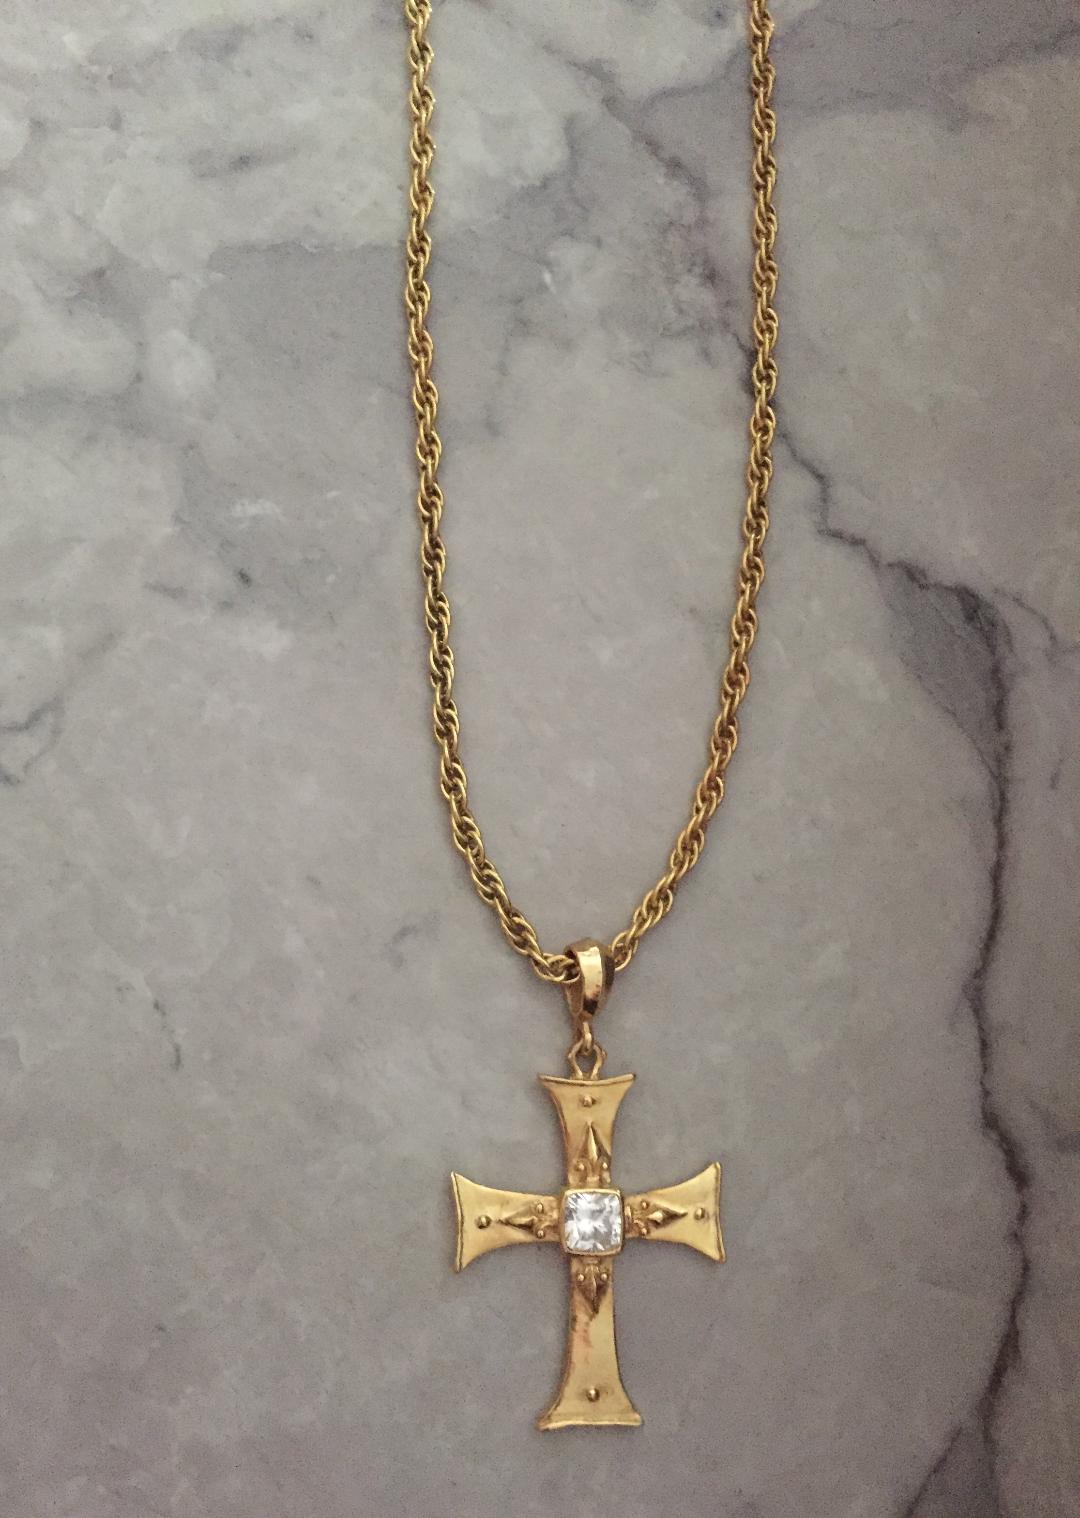 Necklace - Sterling silver Golden Cross with CZ by Roman Paul